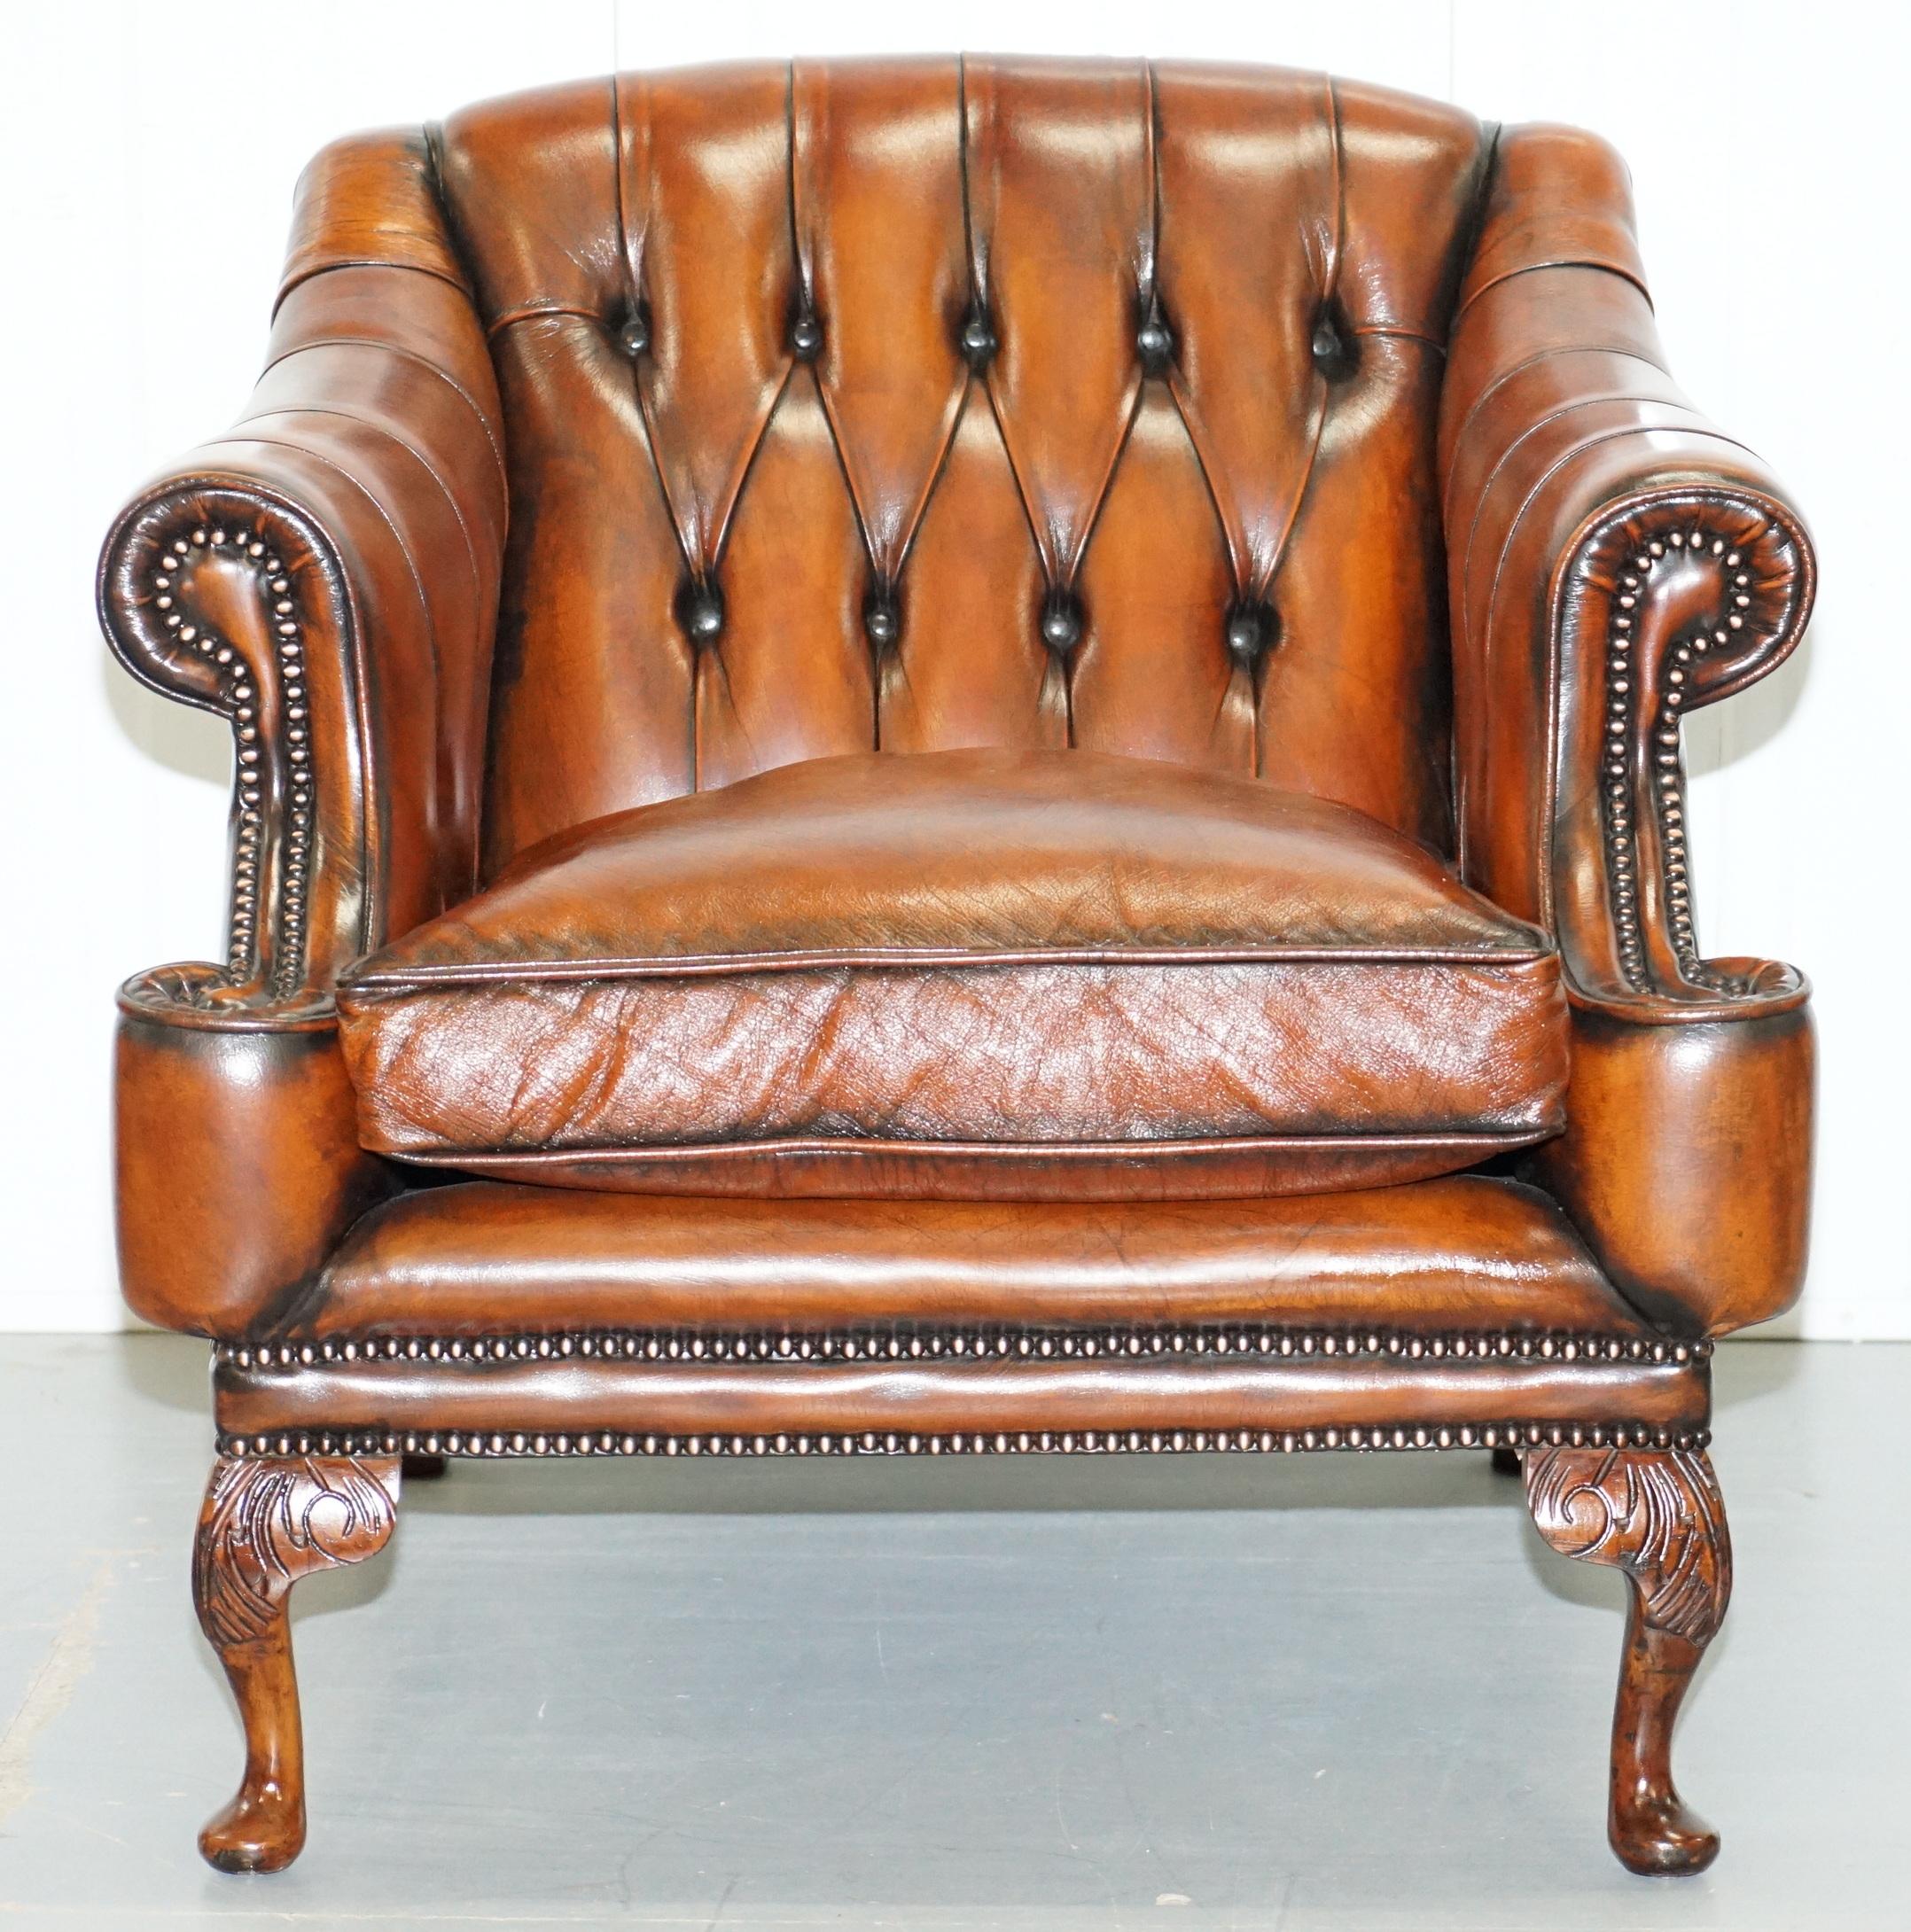 Victorian Restored Lutyen's Style Viceroy's Chesterfield Brown Leather Sofa and Armchairs